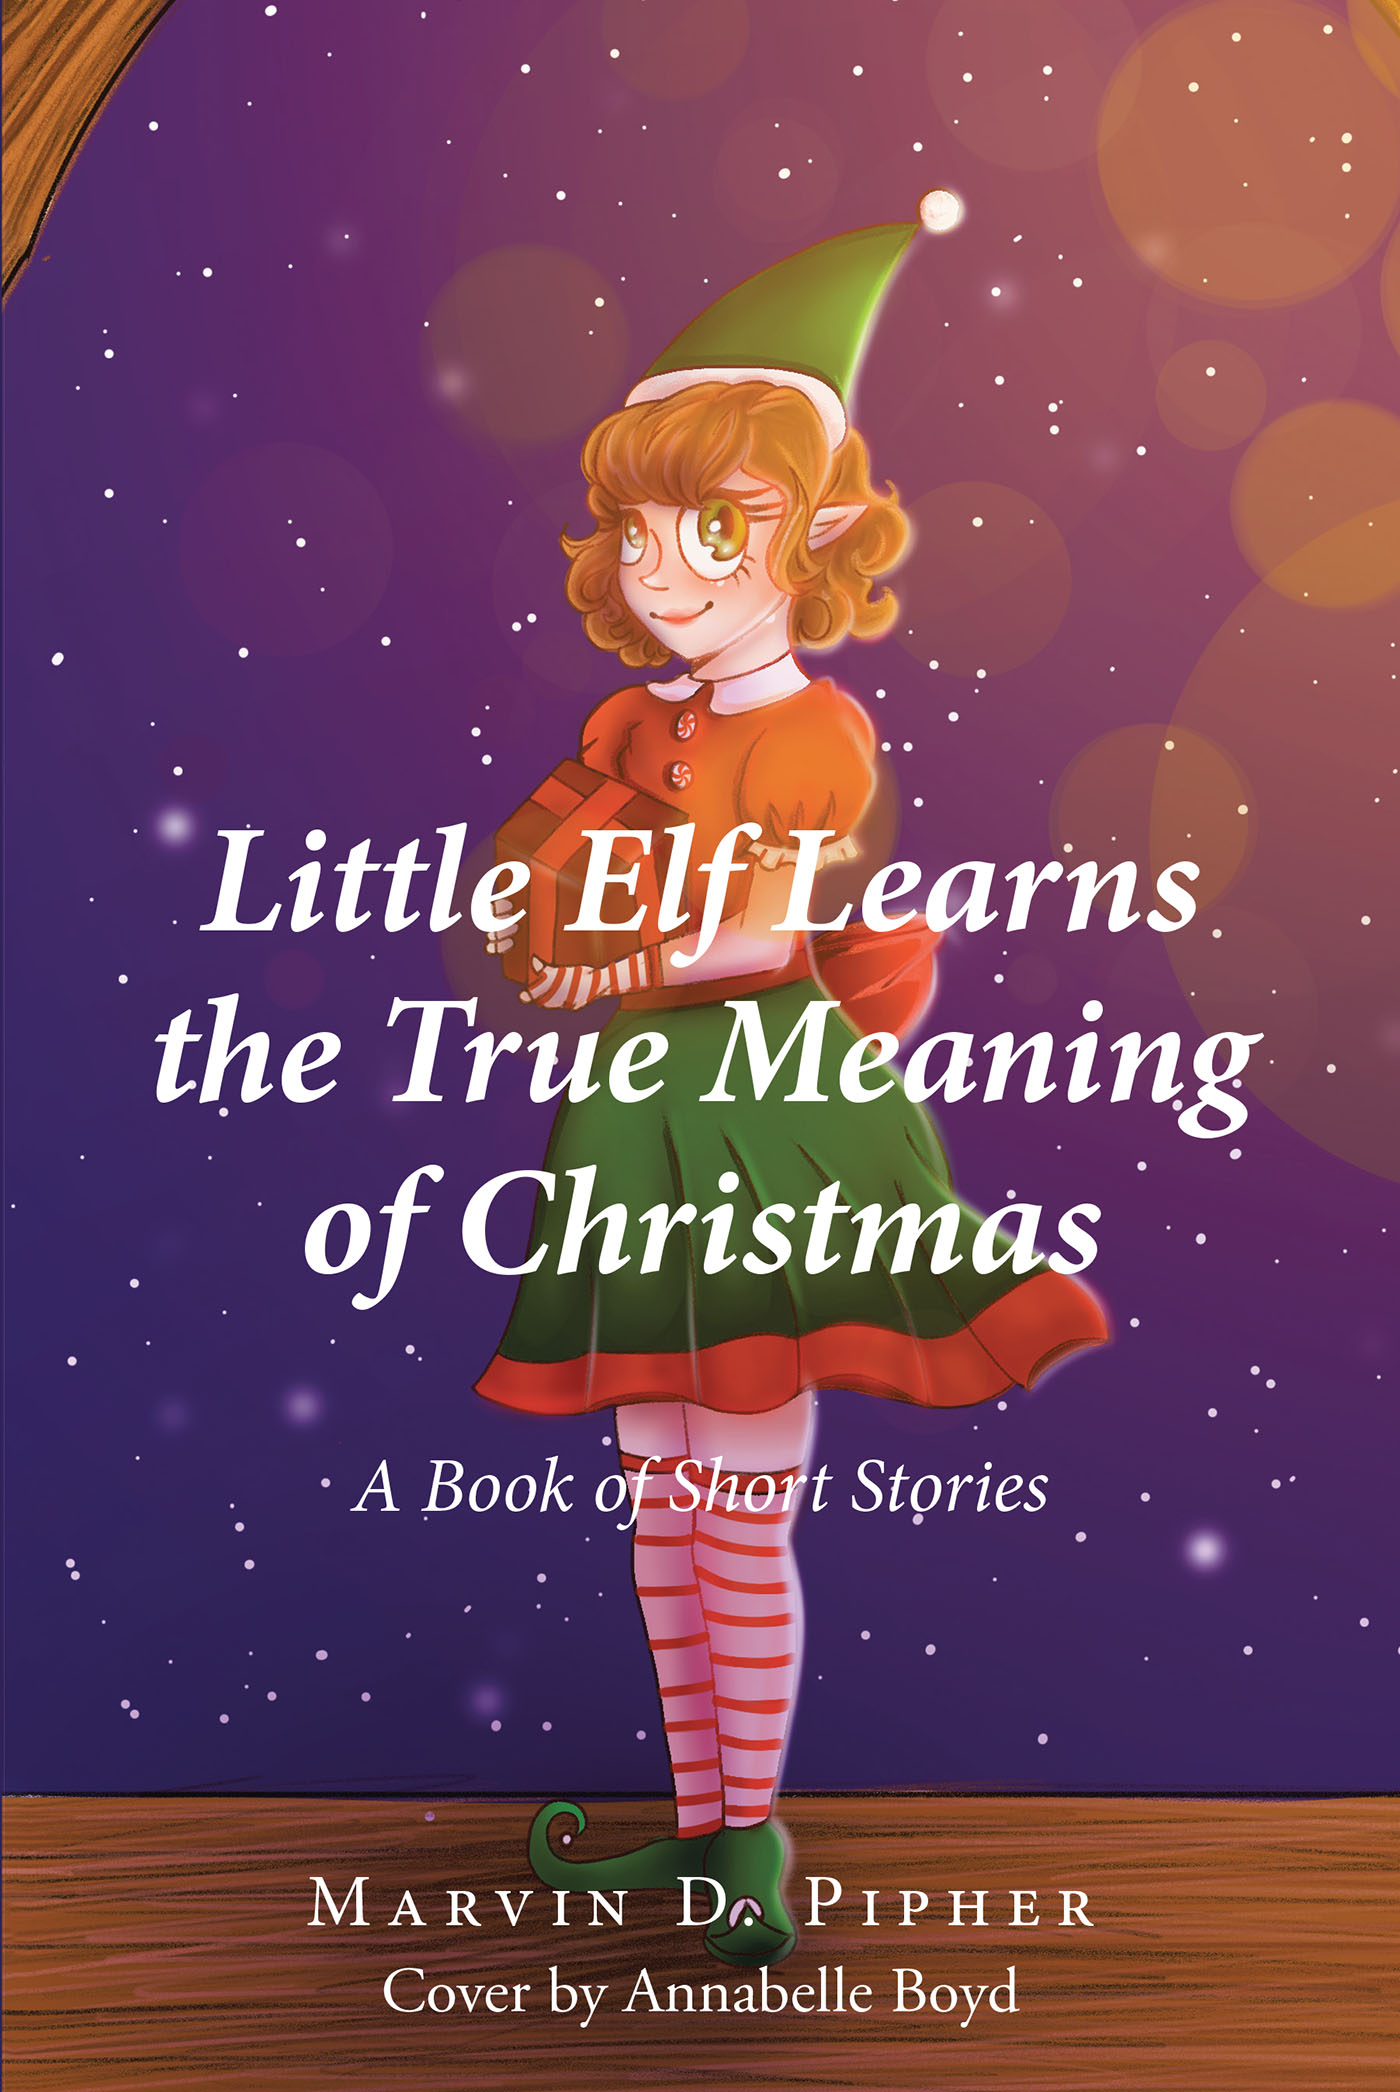 Marvin D. Pipher’s Newly Released "Little Elf Learns the True Meaning of Christmas: A Book of Short Stories" is an Enjoyable Christmas Treasury